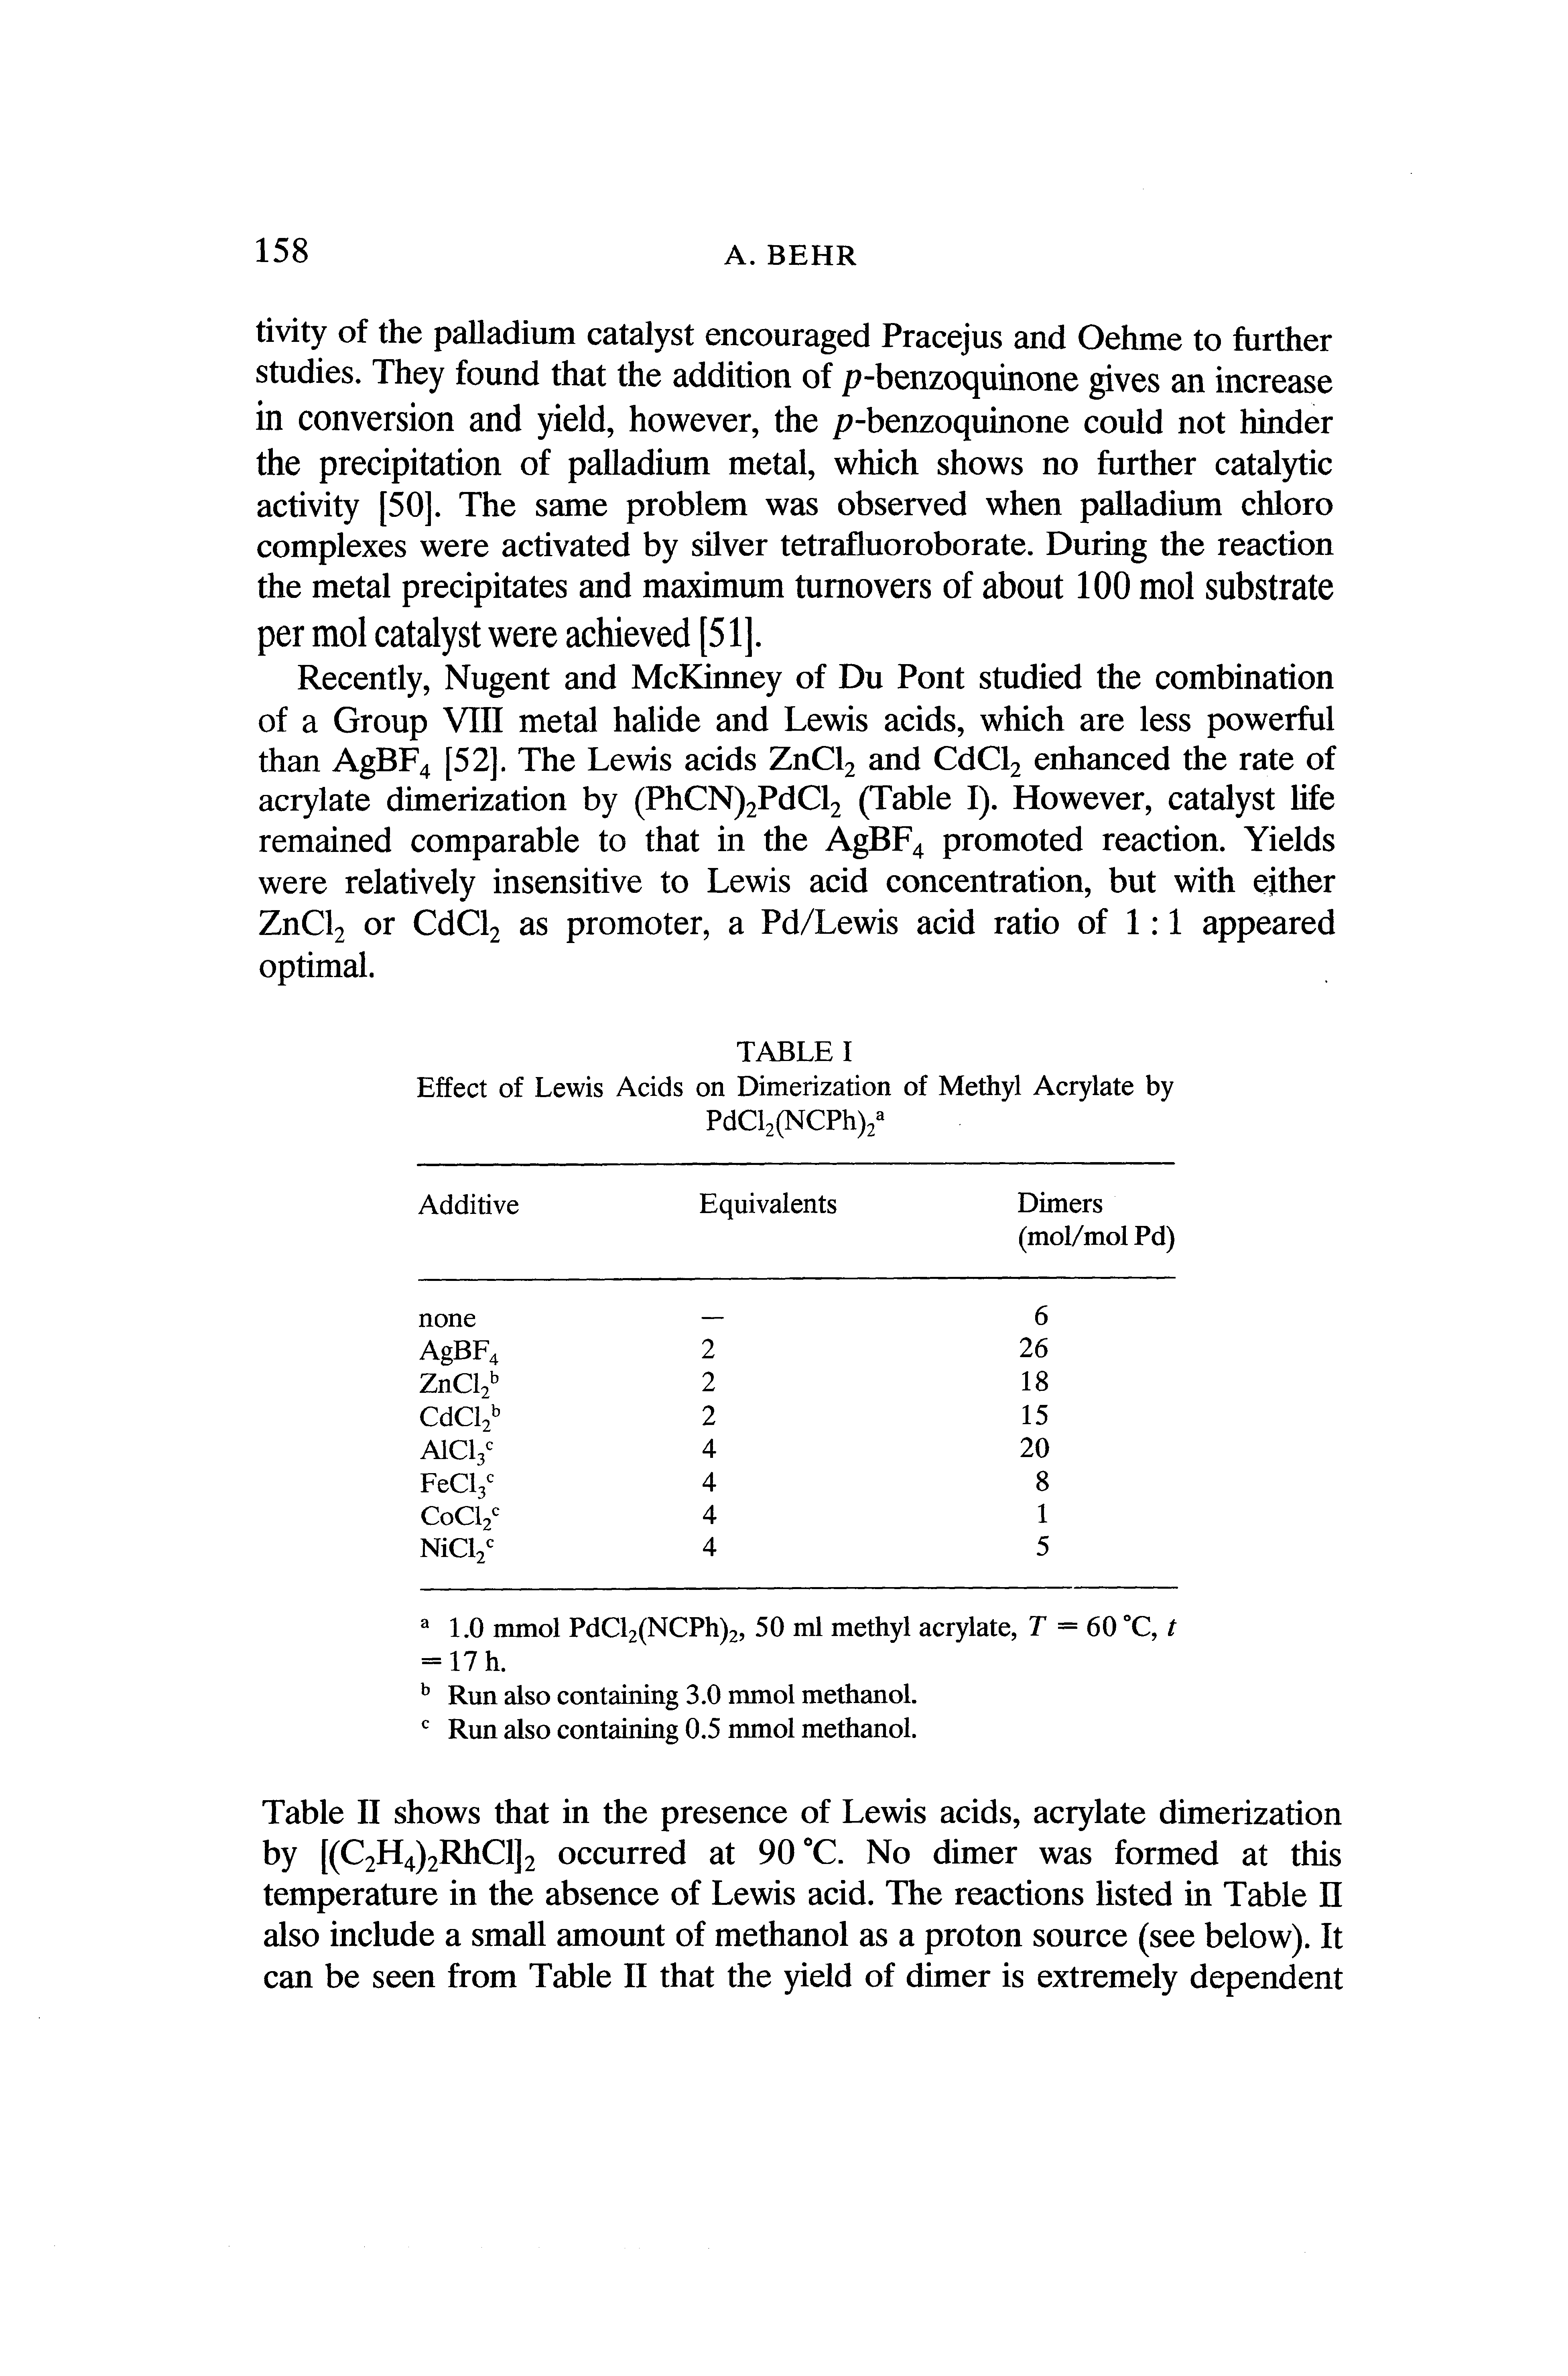 Table II shows that in the presence of Lewis acids, acrylate dimerization by [(C2H4)2RhCl]2 occurred at 90 C. No dimer was formed at this temperature in the absence of Lewis acid. The reactions listed in Table II also include a small amount of methanol as a proton source (see below). It can be seen from Table II that the yield of dimer is extremely dependent...